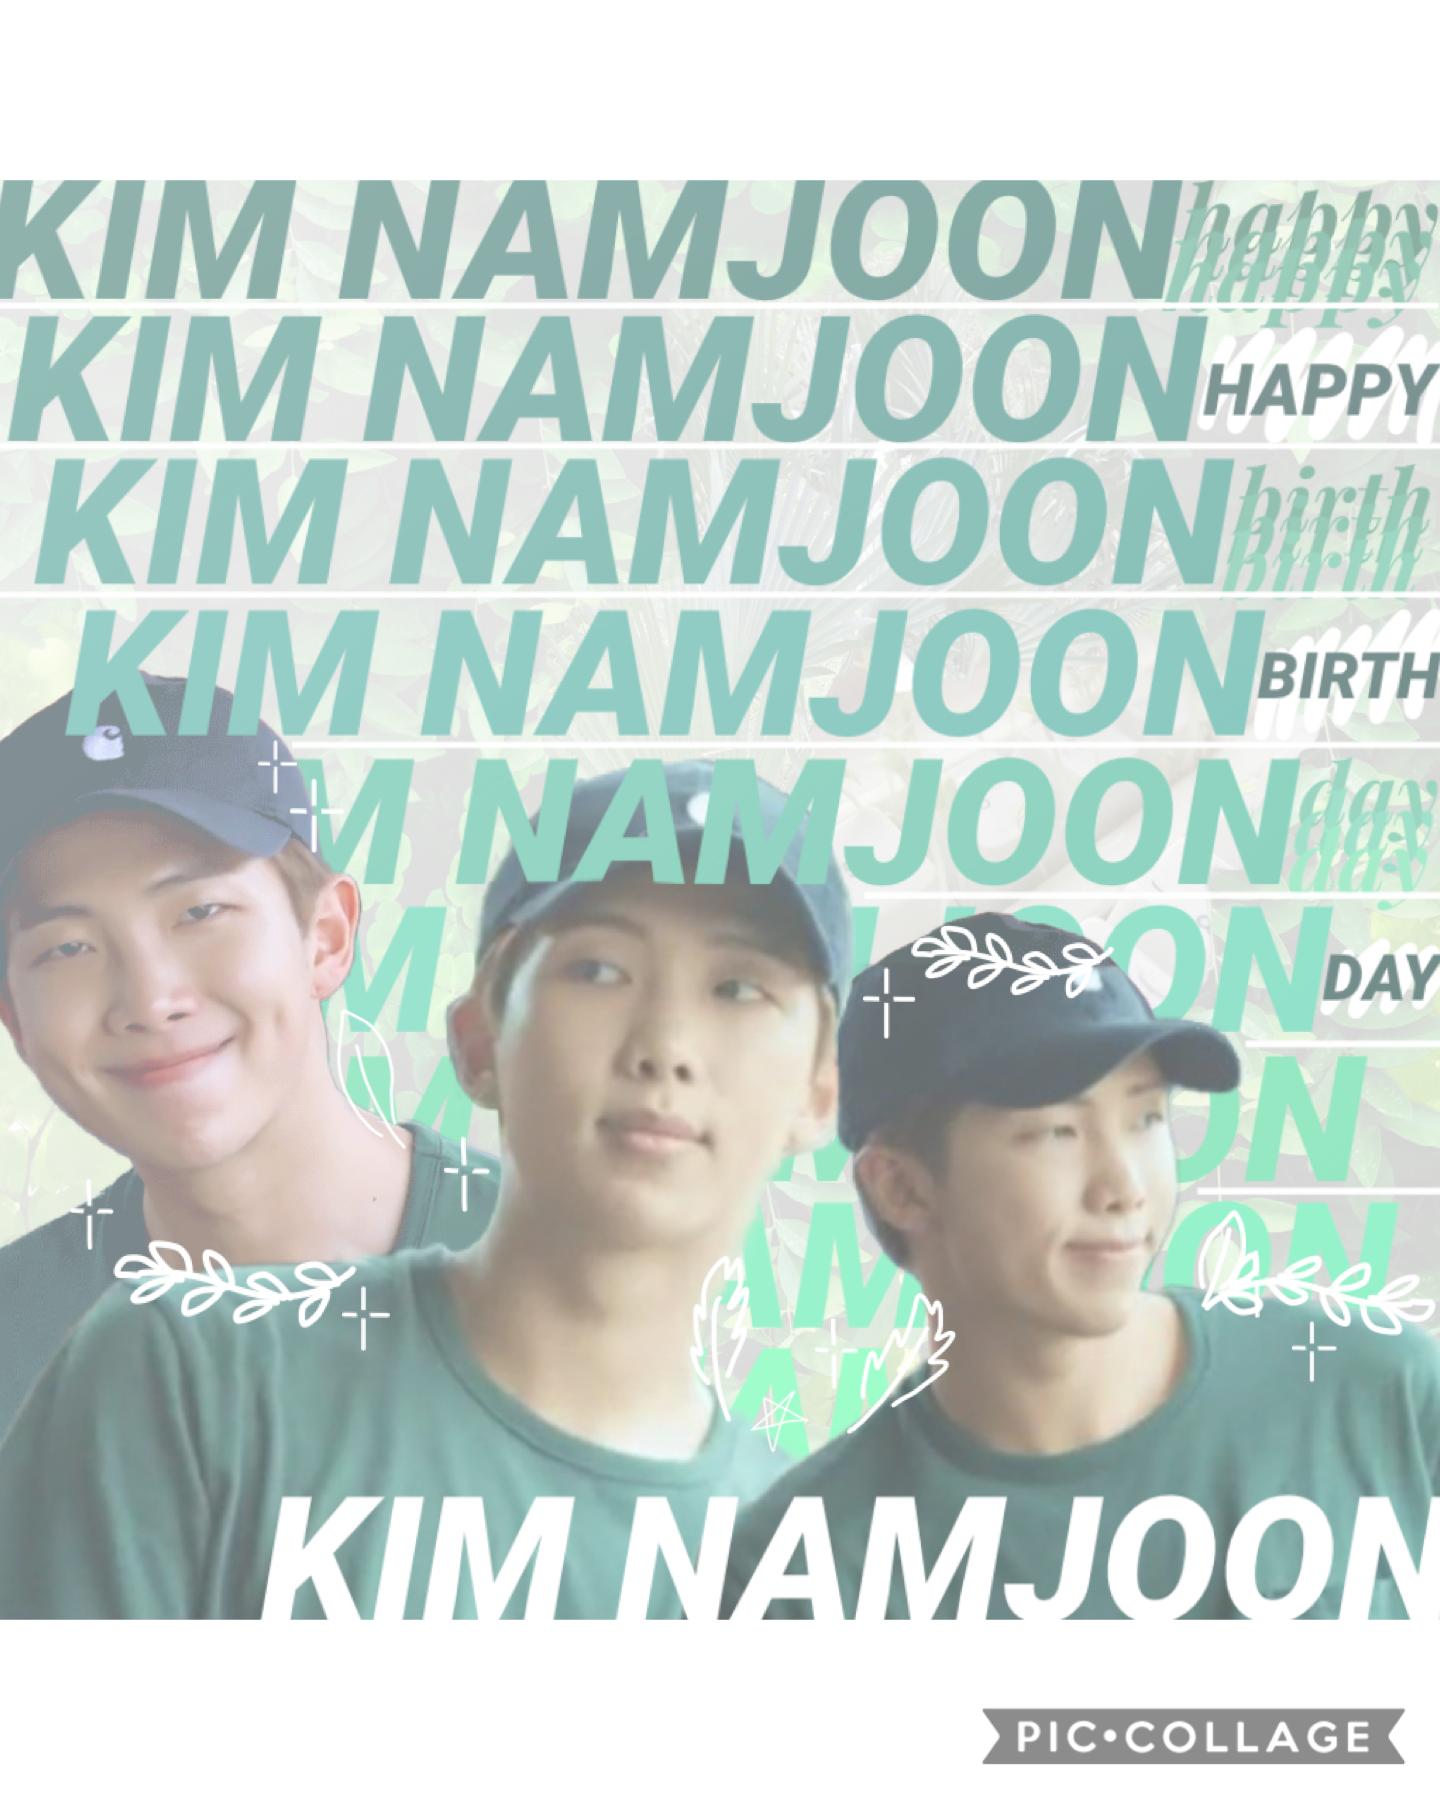 ||🌿|| KIM NAMJOON ||🌿||

happy birthday to our precious leader!! ; army loves u so much joonie, thank you for being our strength and our inspiration 🥺 ; the new color text thing is blowing my mind wth ; ilyasm! — august